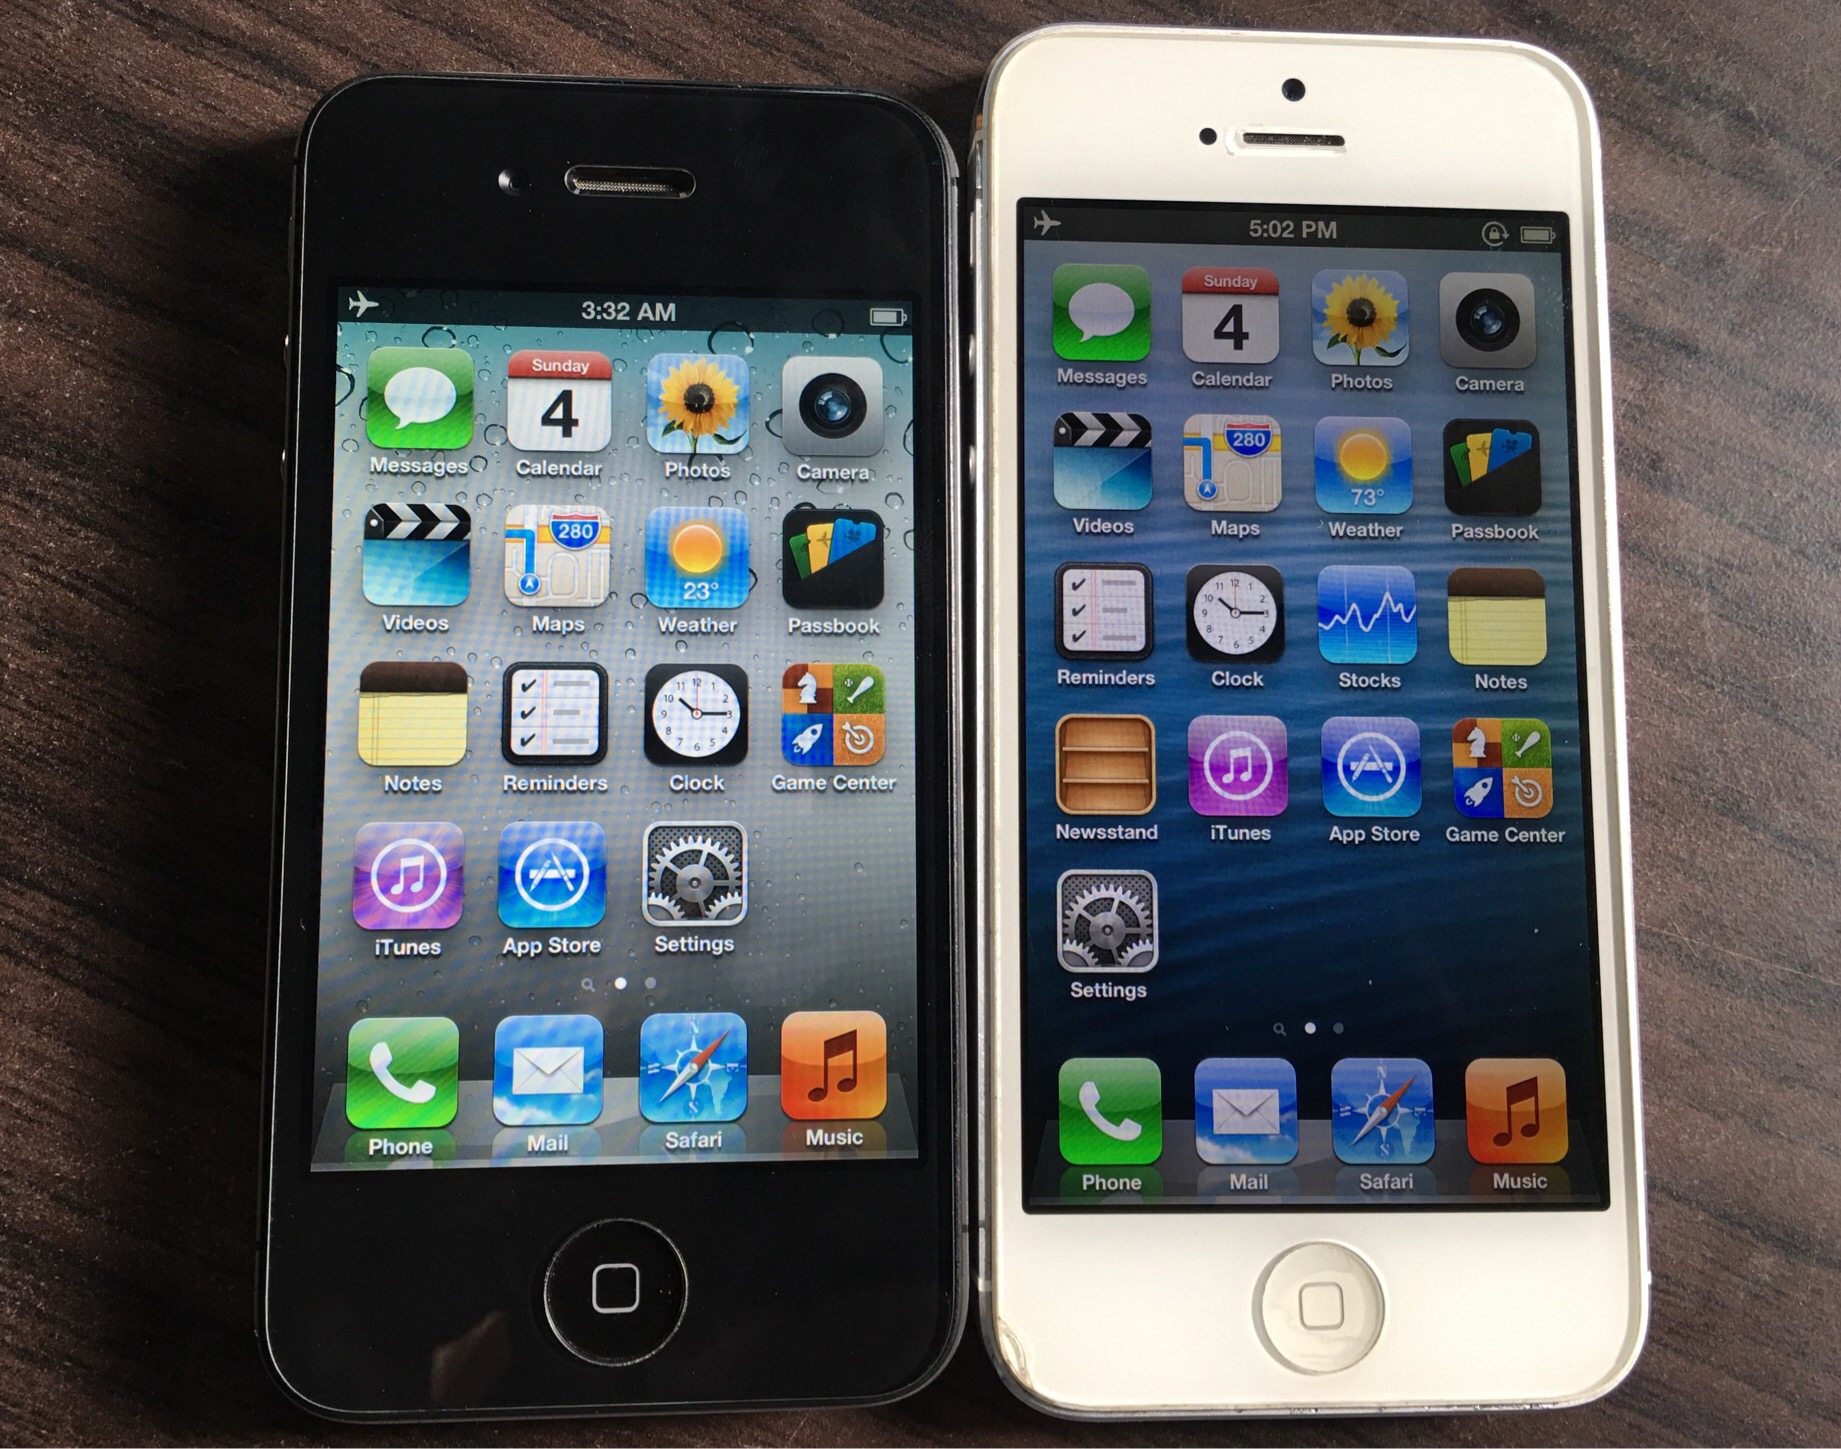 iPhone 5 vs iPhone 4S: Our in-depth comparison